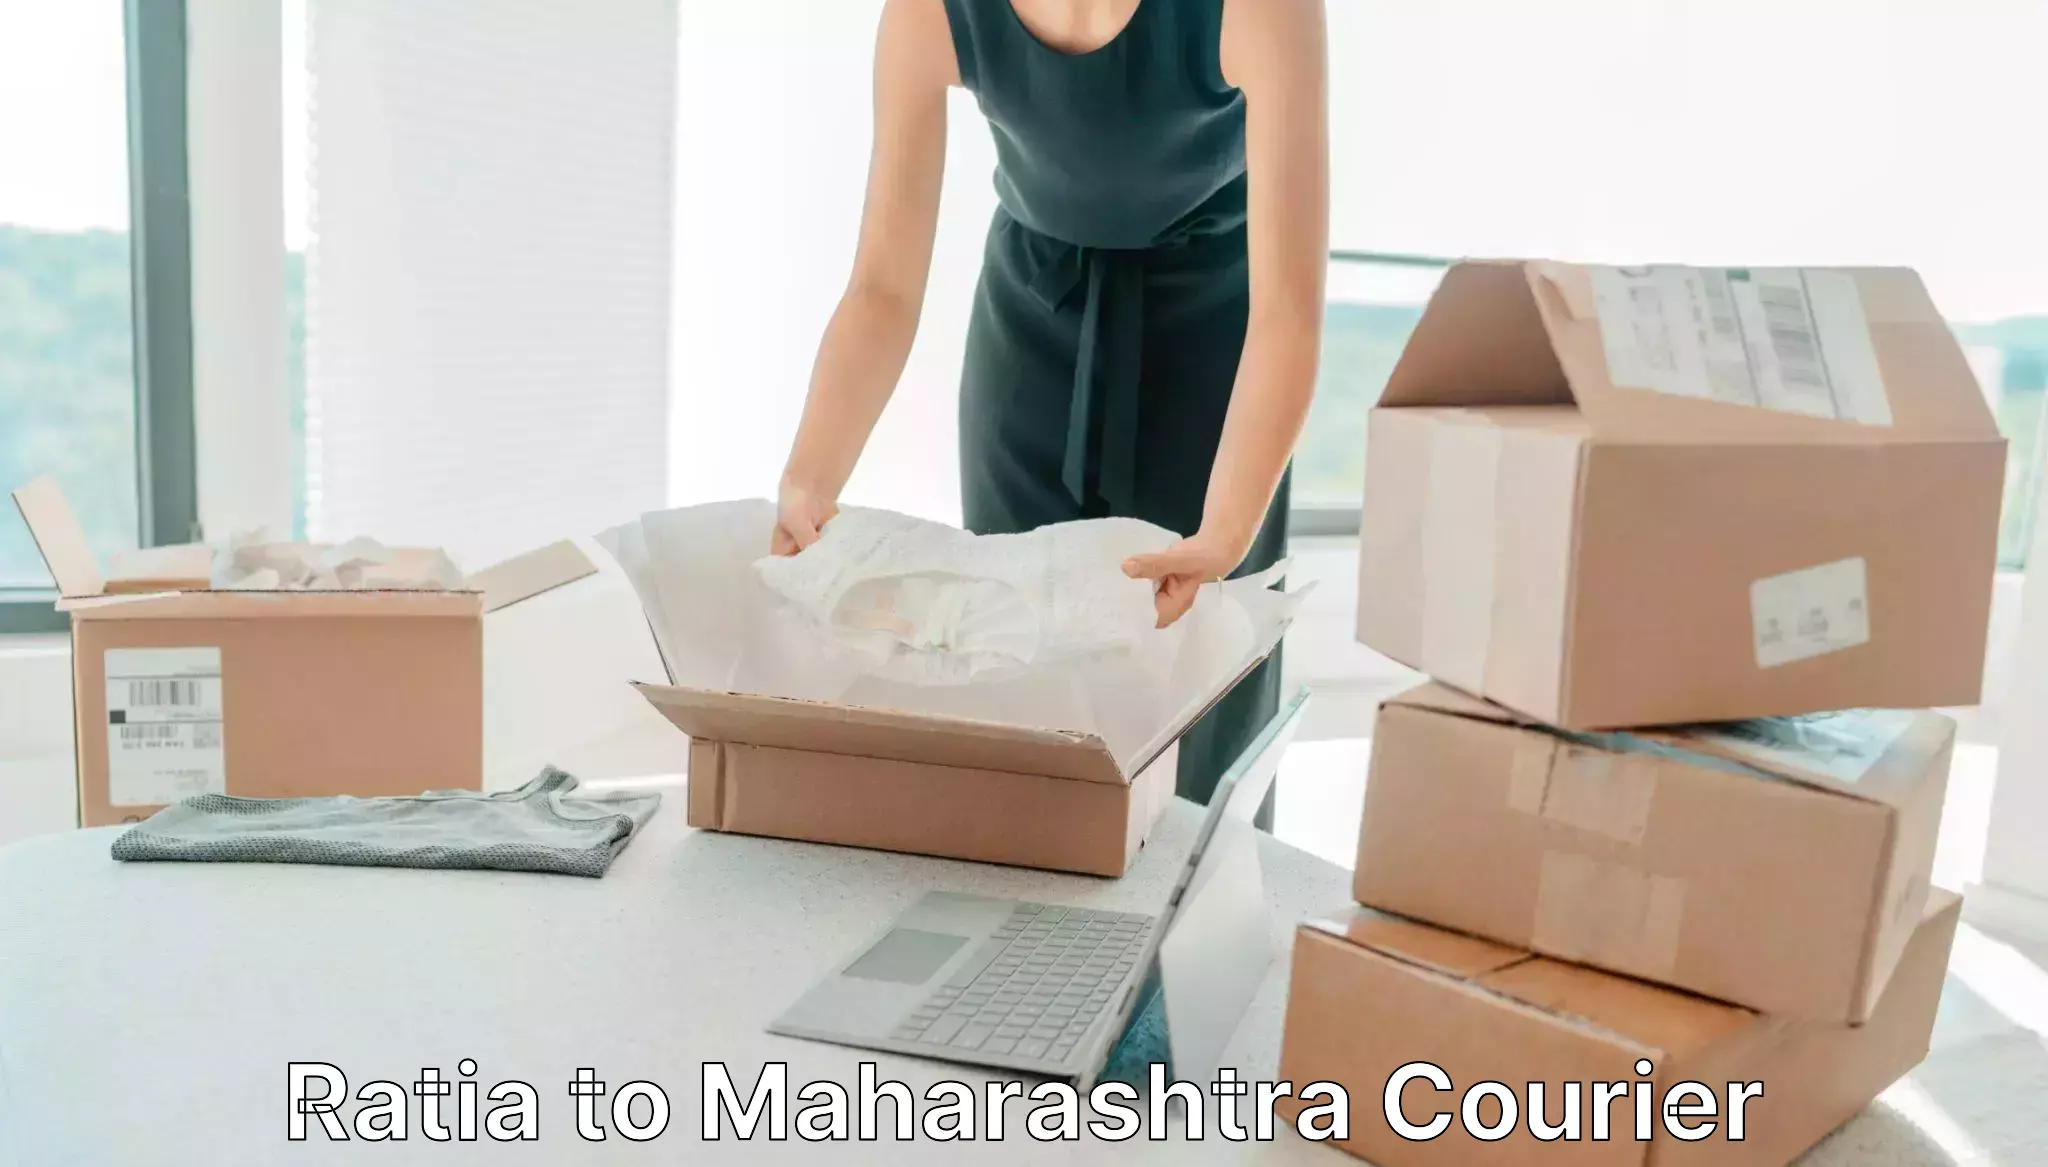 Multi-national courier services Ratia to Pathardi